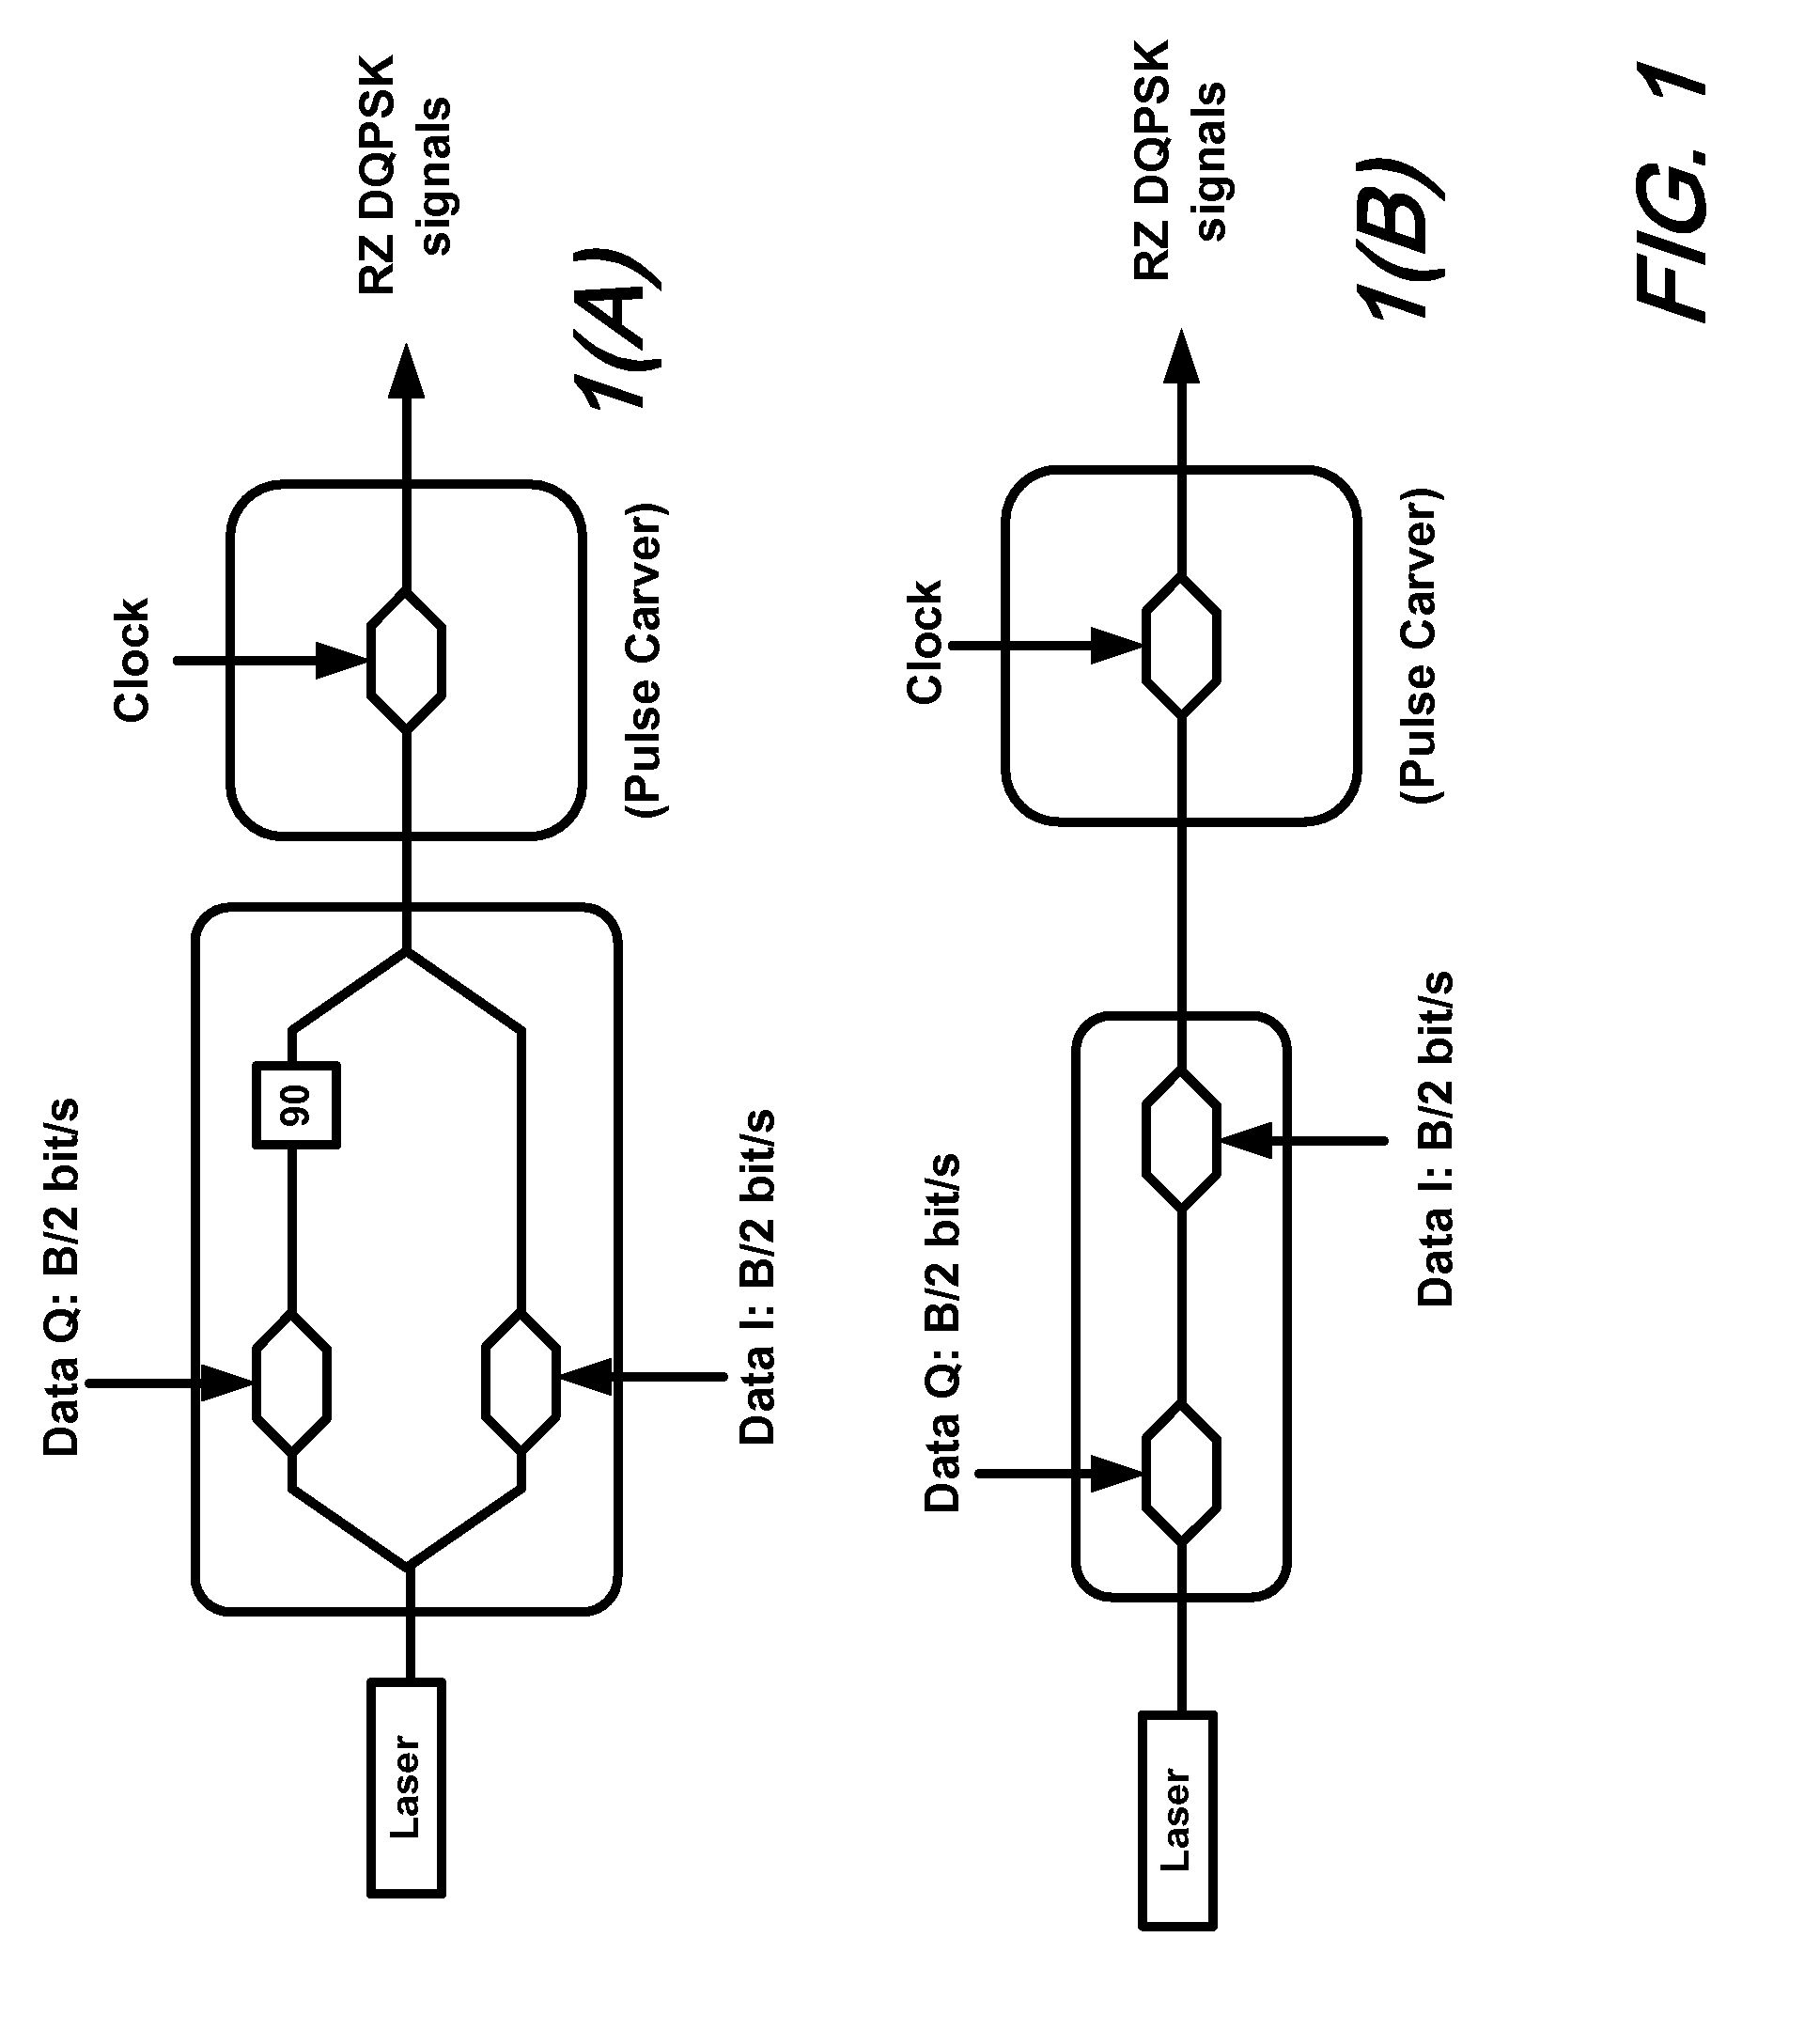 Colorless optical demodulator for differential quadrature phase shift keying dwdm systems